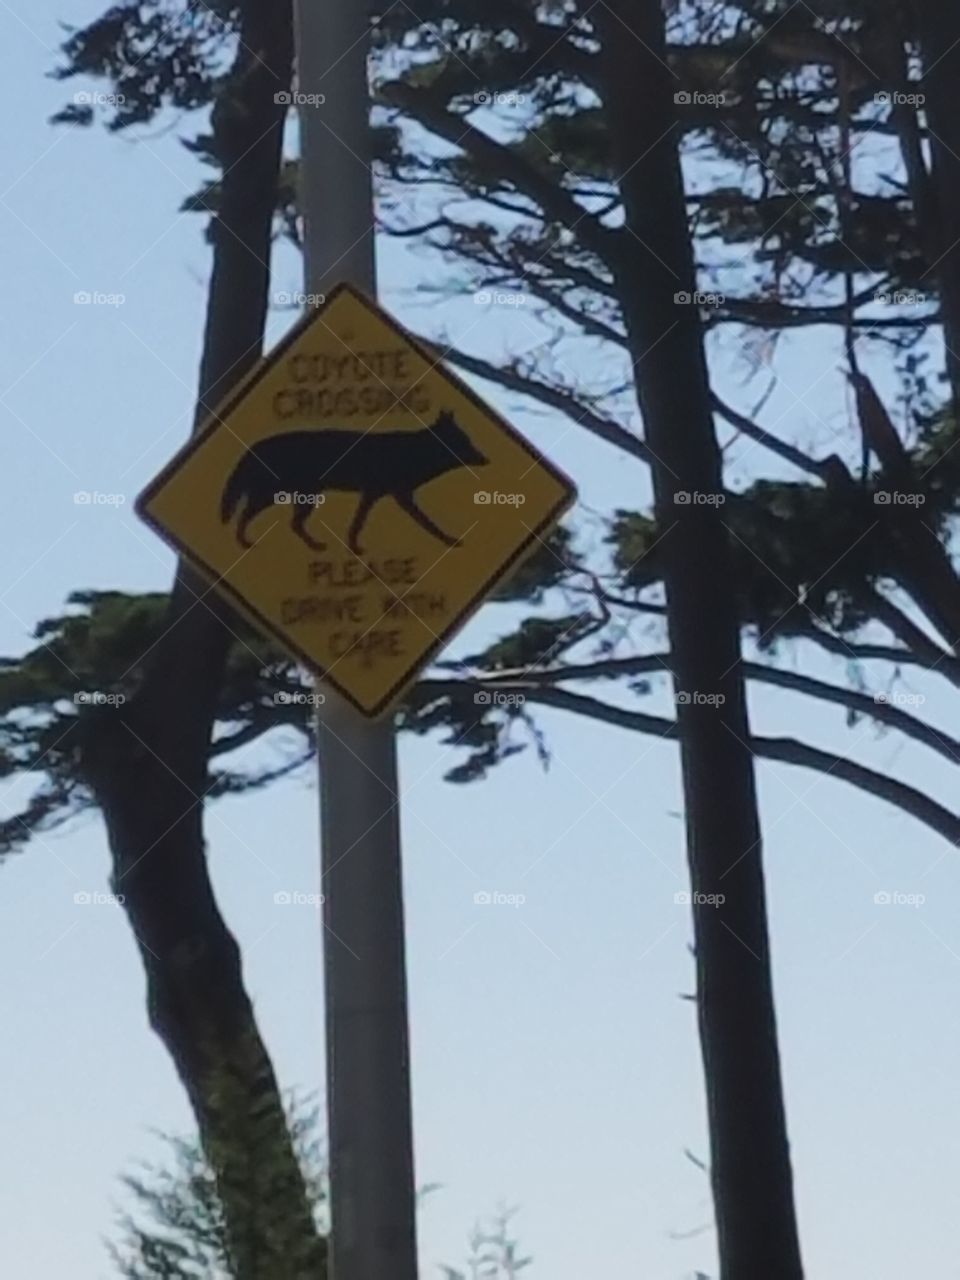 Coyote sign